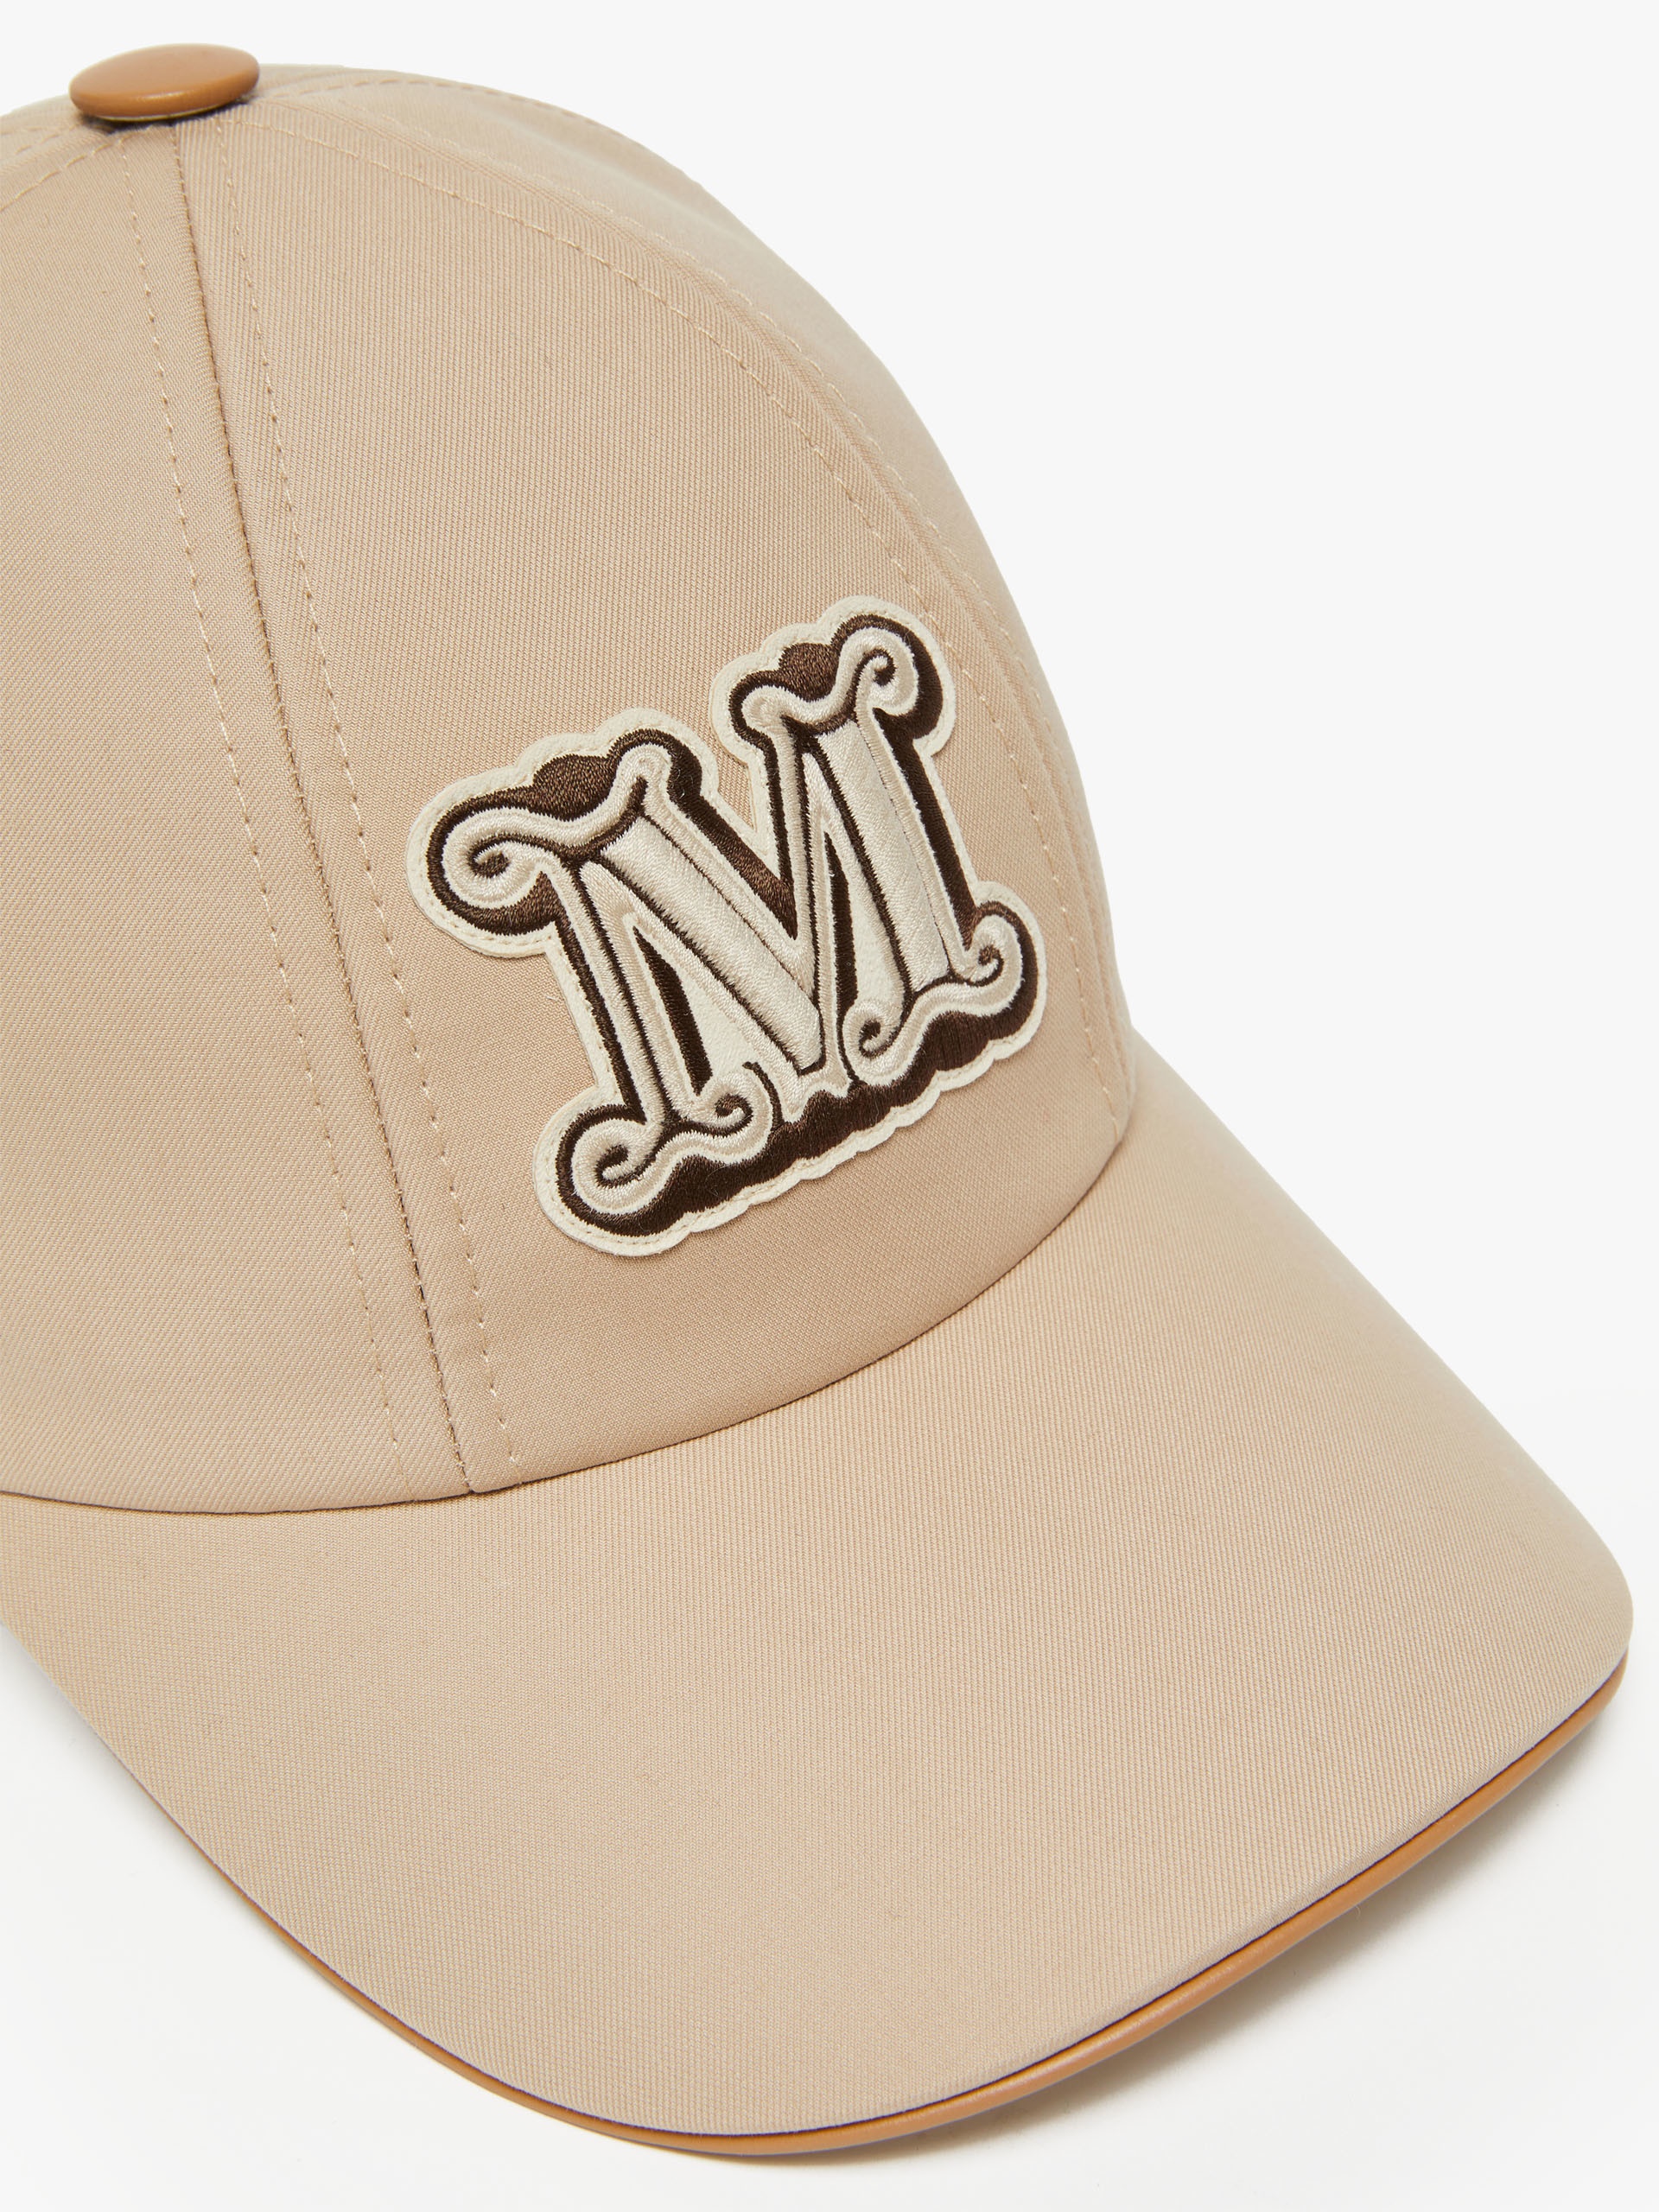 Baseball hat in water-resistant fabric - 2